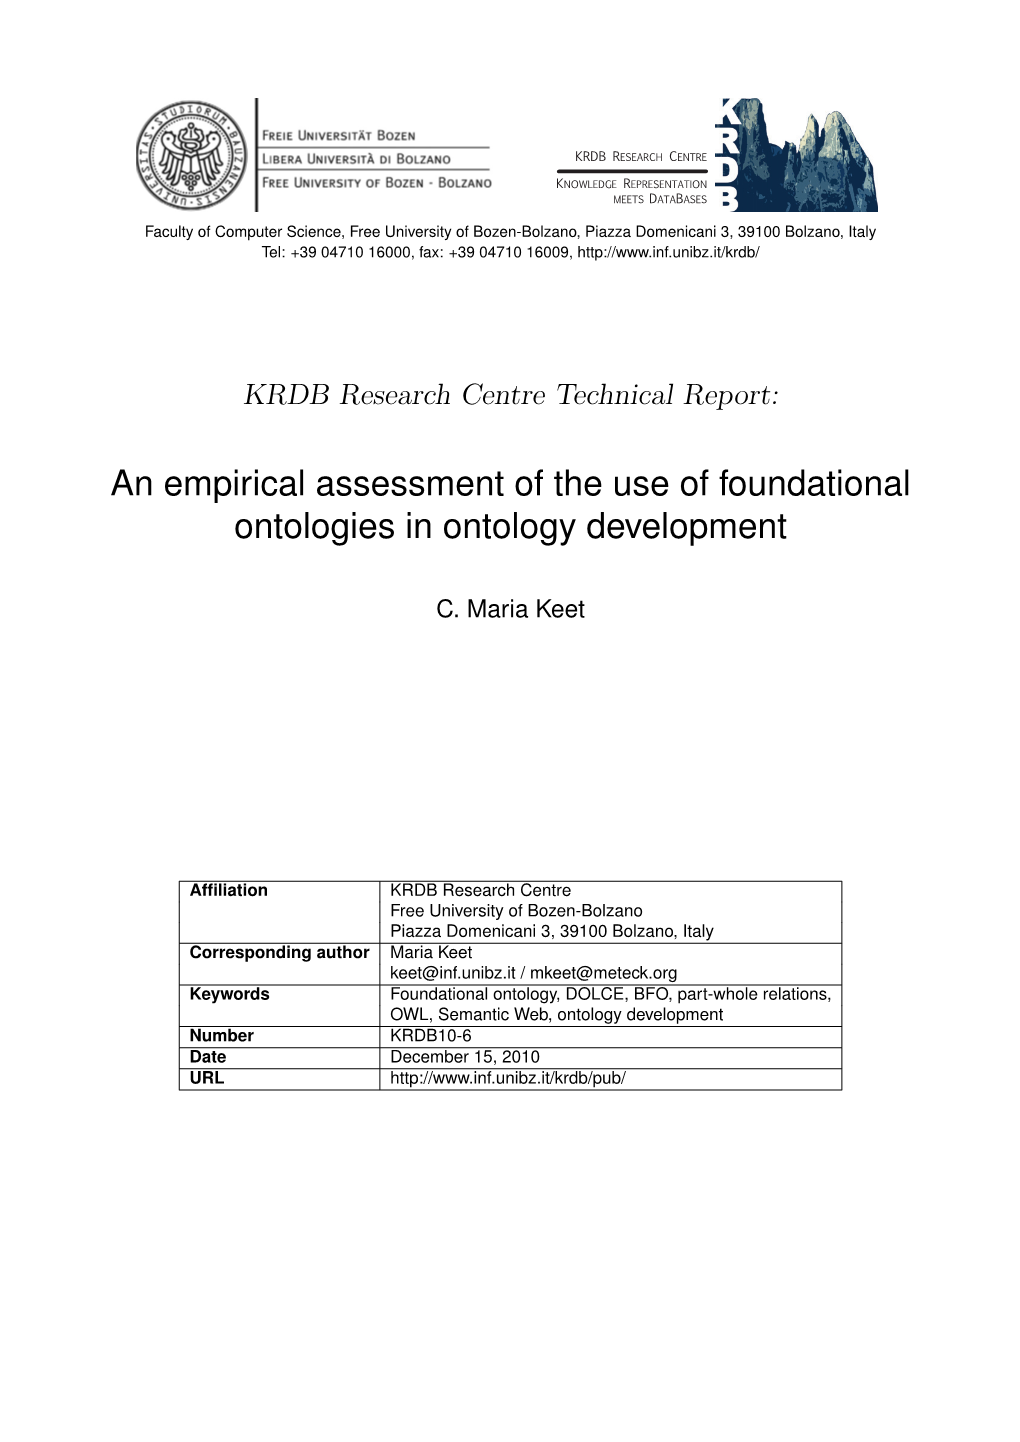 An Empirical Assessment of the Use of Foundational Ontologies in Ontology Development